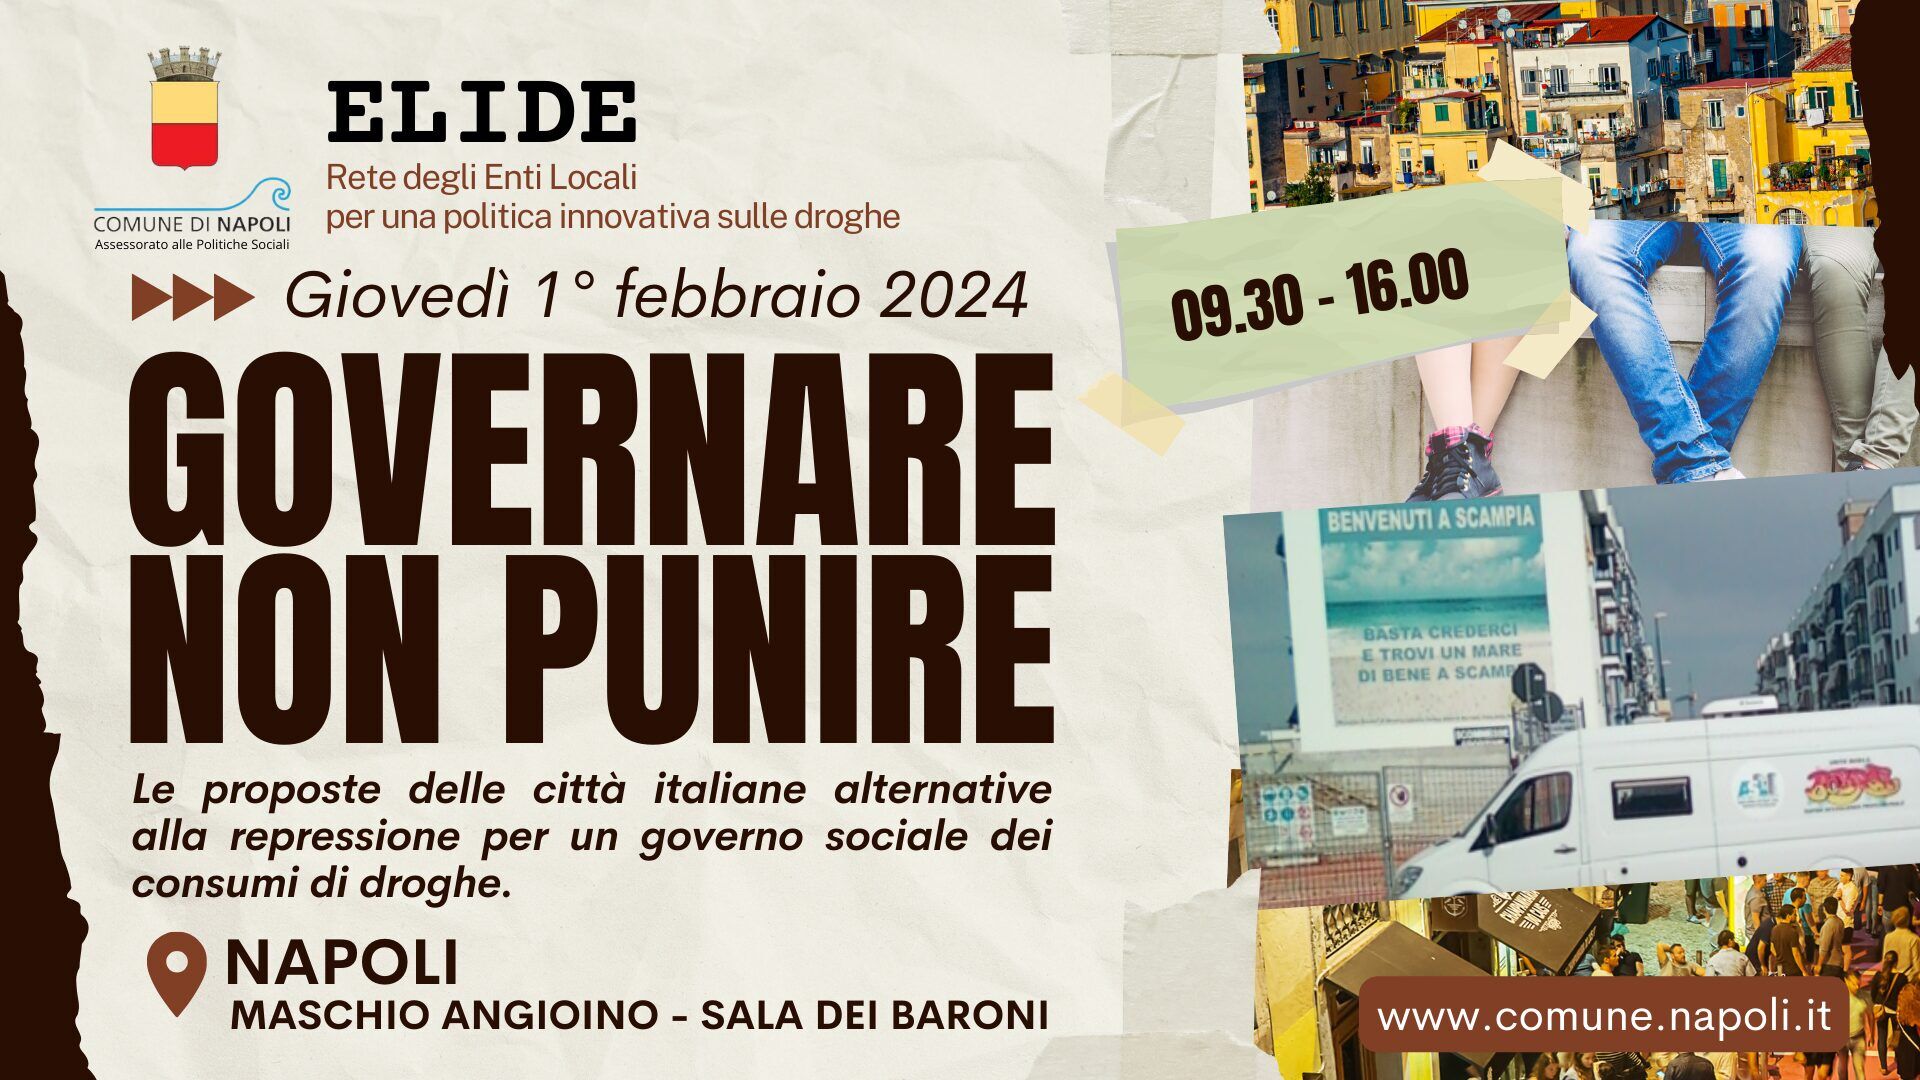 Elide Napoli Save the date